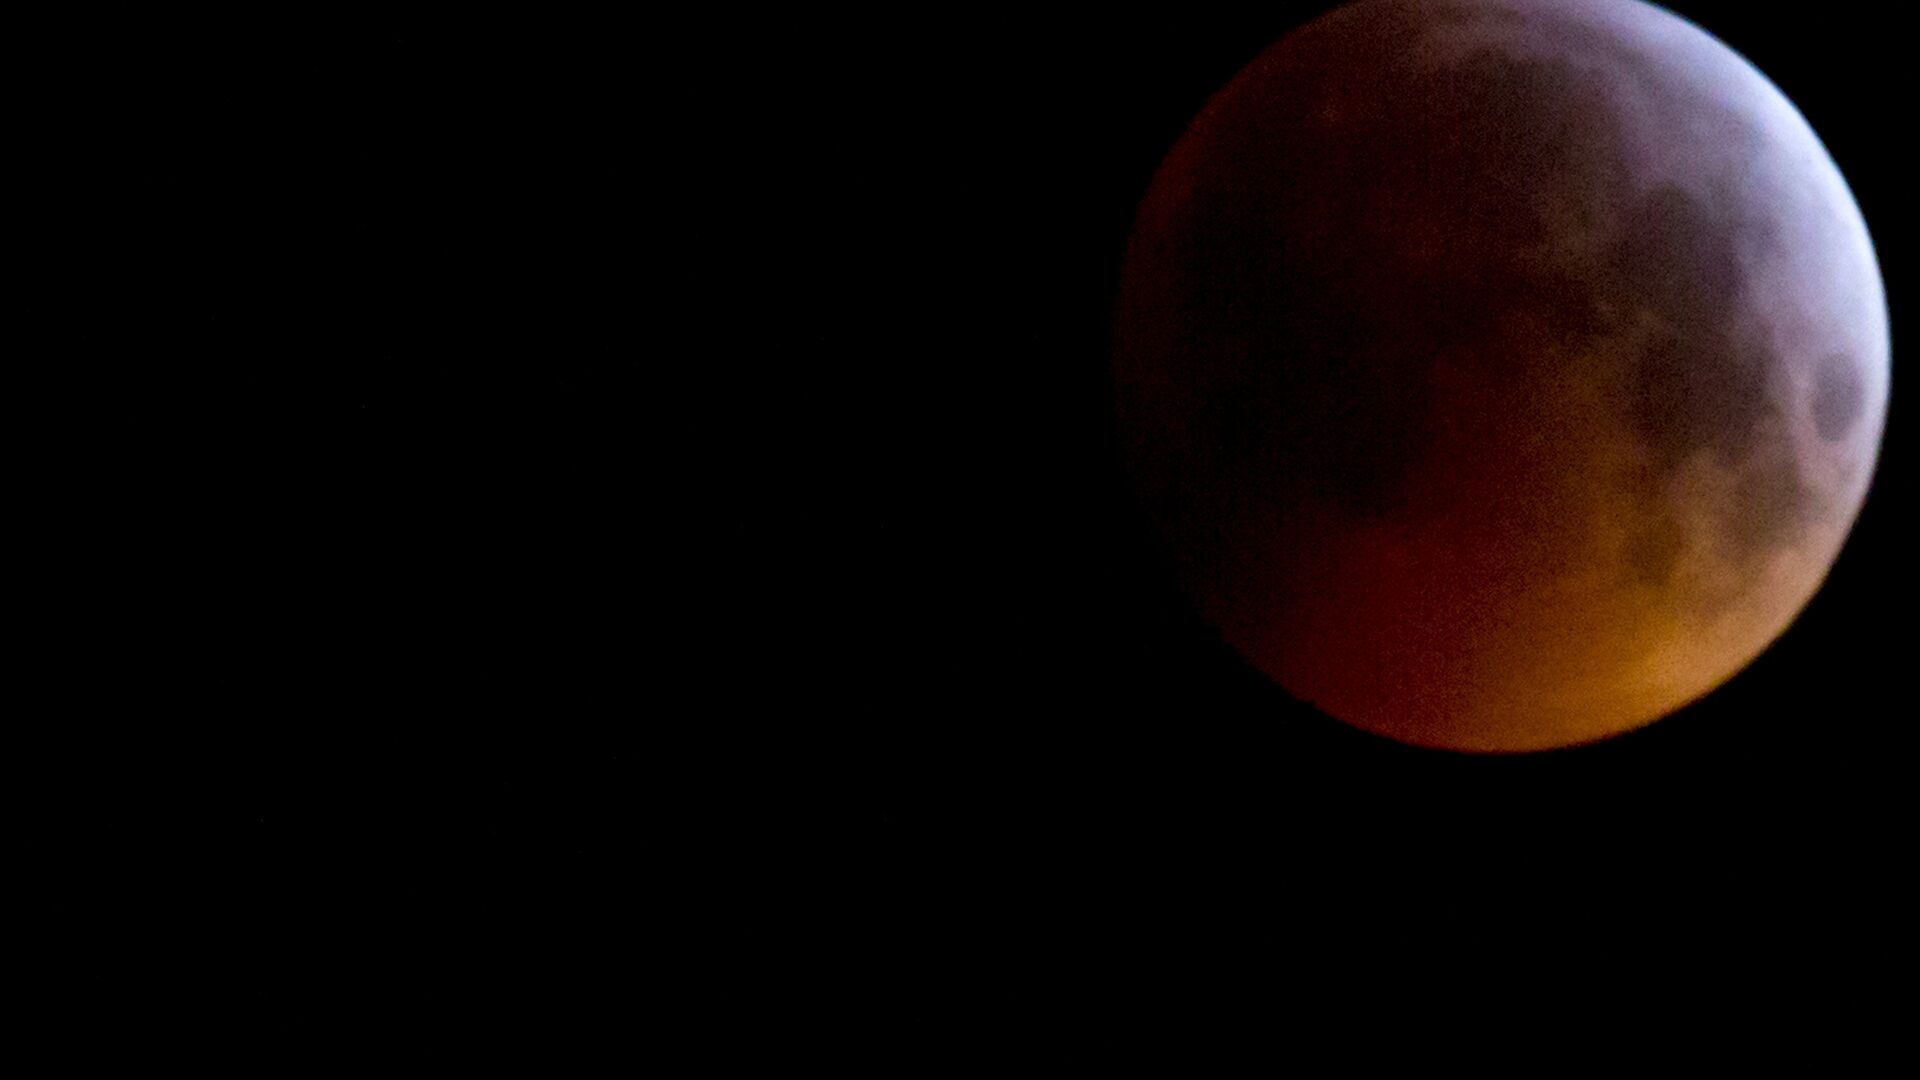 The Super Blood Wolf Moon eclipse in Antwerp, Belgium, Monday, Jan. 21, 2019. The eclipse takes place when the full moon is at or near the closest point in its orbit to Earth, a time popularly known as a supermoon. This means the Moon is deeper inside the umbra shadow and therefore may appear darker. - اسپوتنیک افغانستان  , 1920, 13.07.2022